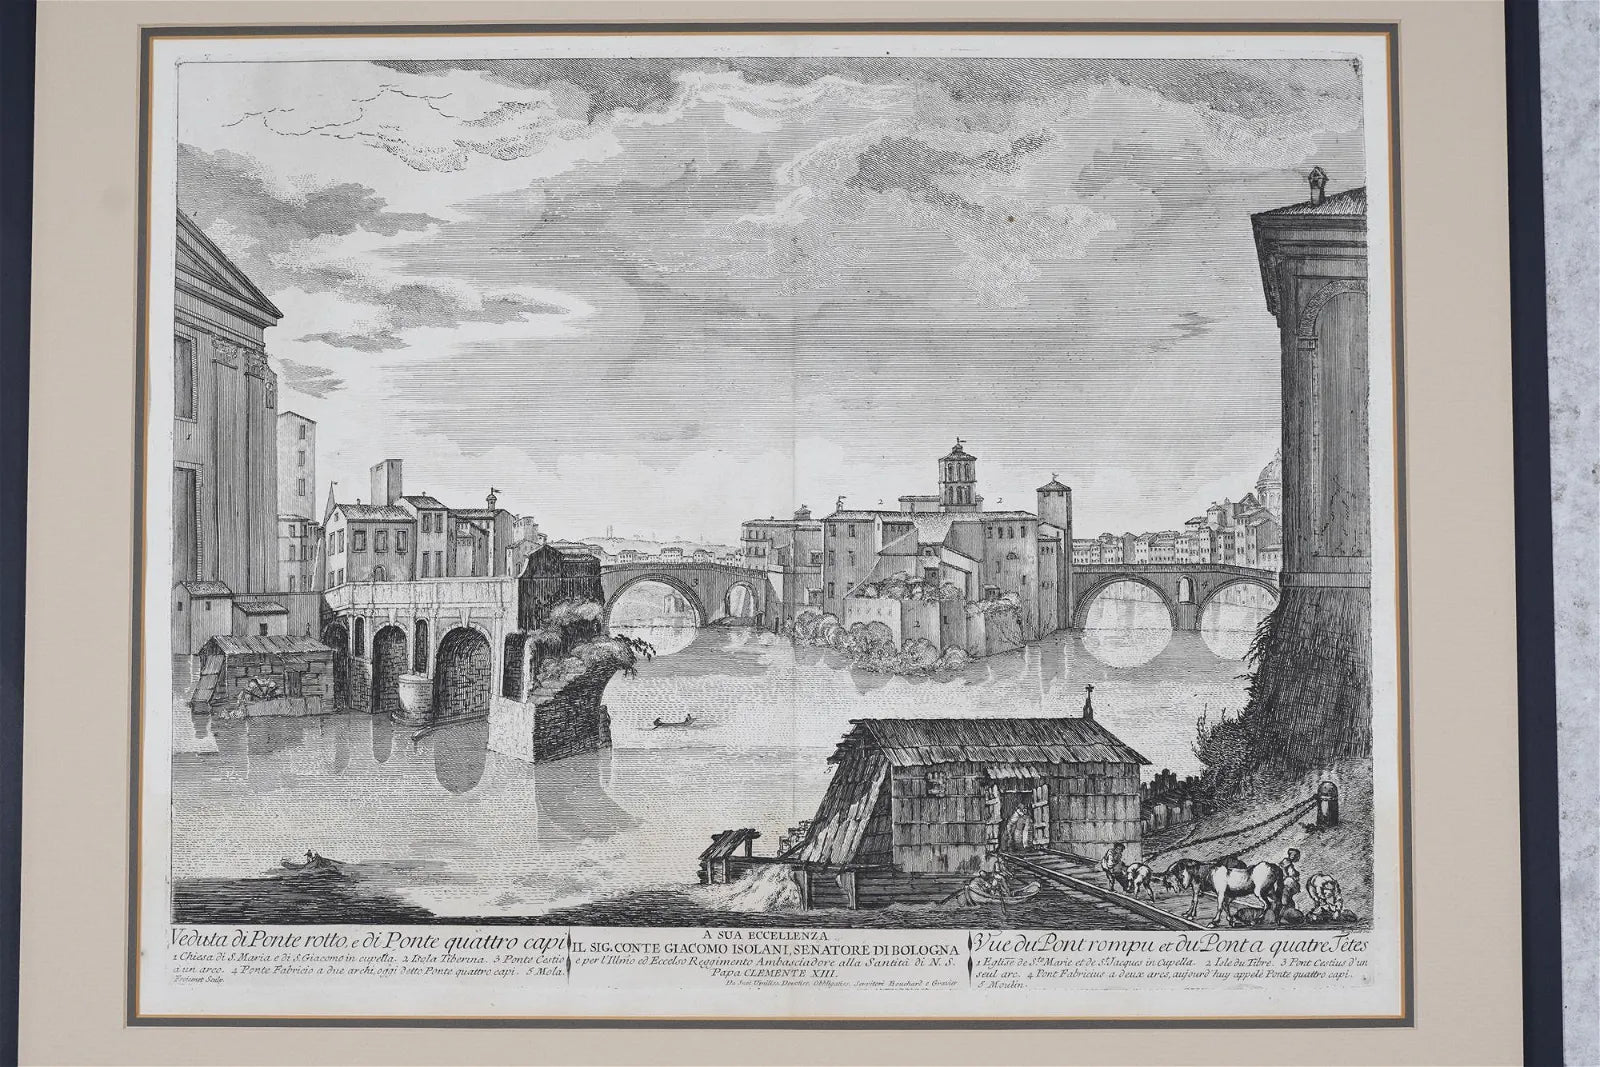 AW7-010: JEAN BARBAULT - SET OF 5 ANTIQUE ENGRAVINGS - VIEWS OF 18TH CENTURY ROME